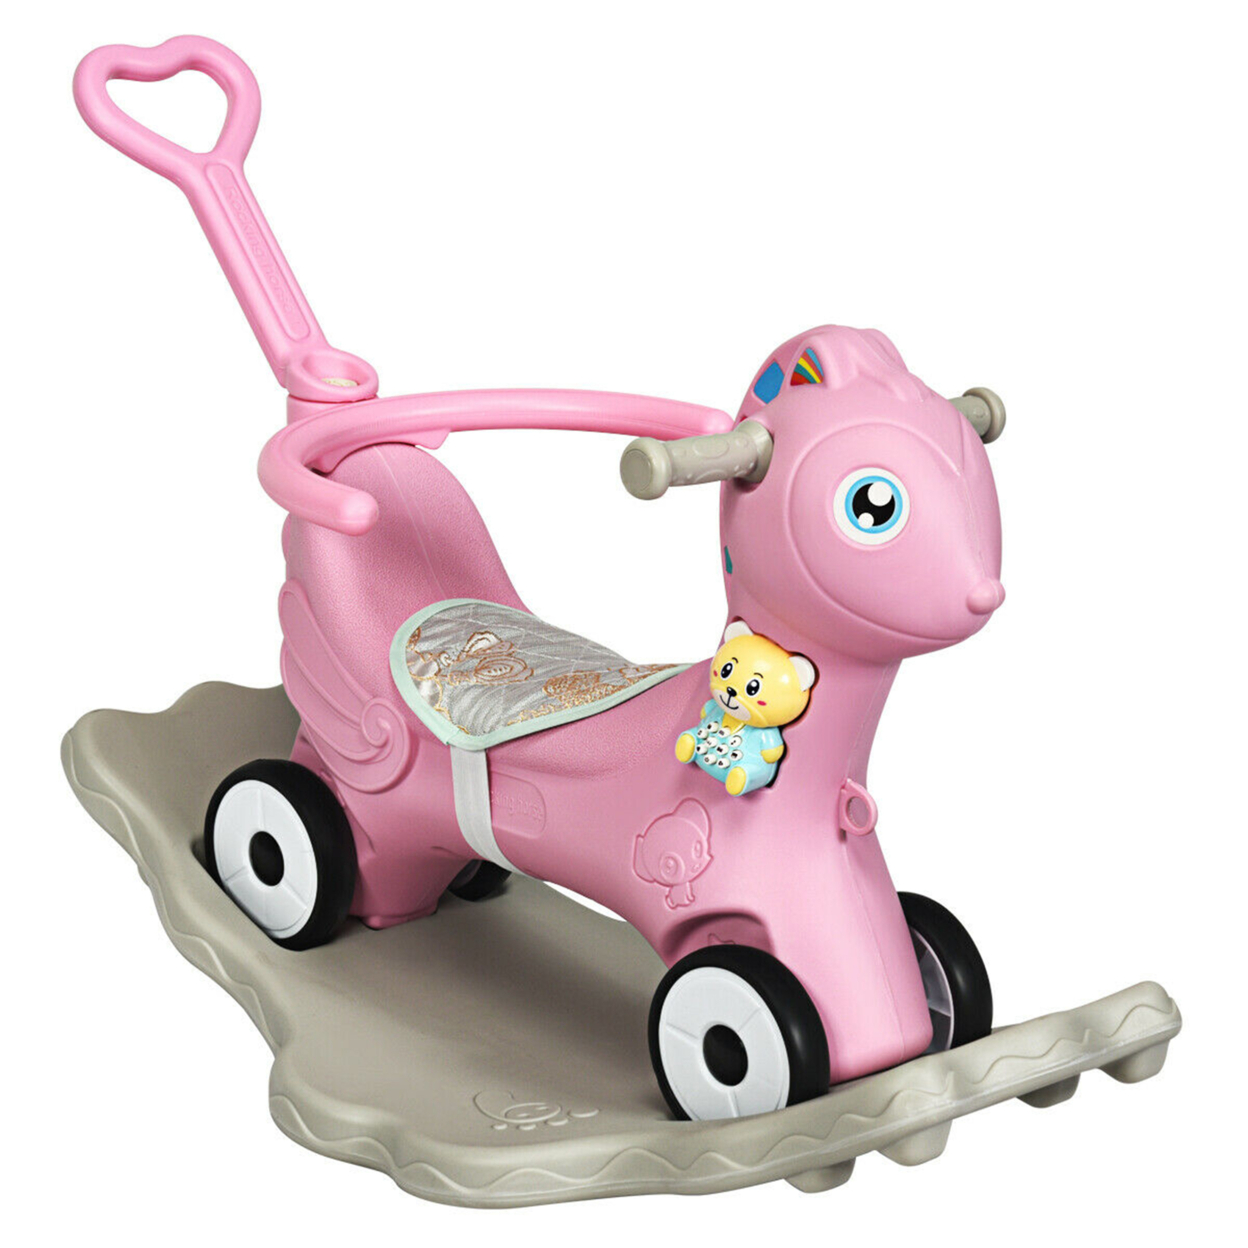 Baby Rocking Horse 4 In 1 Kids Ride On Toy Push Car W/ Music